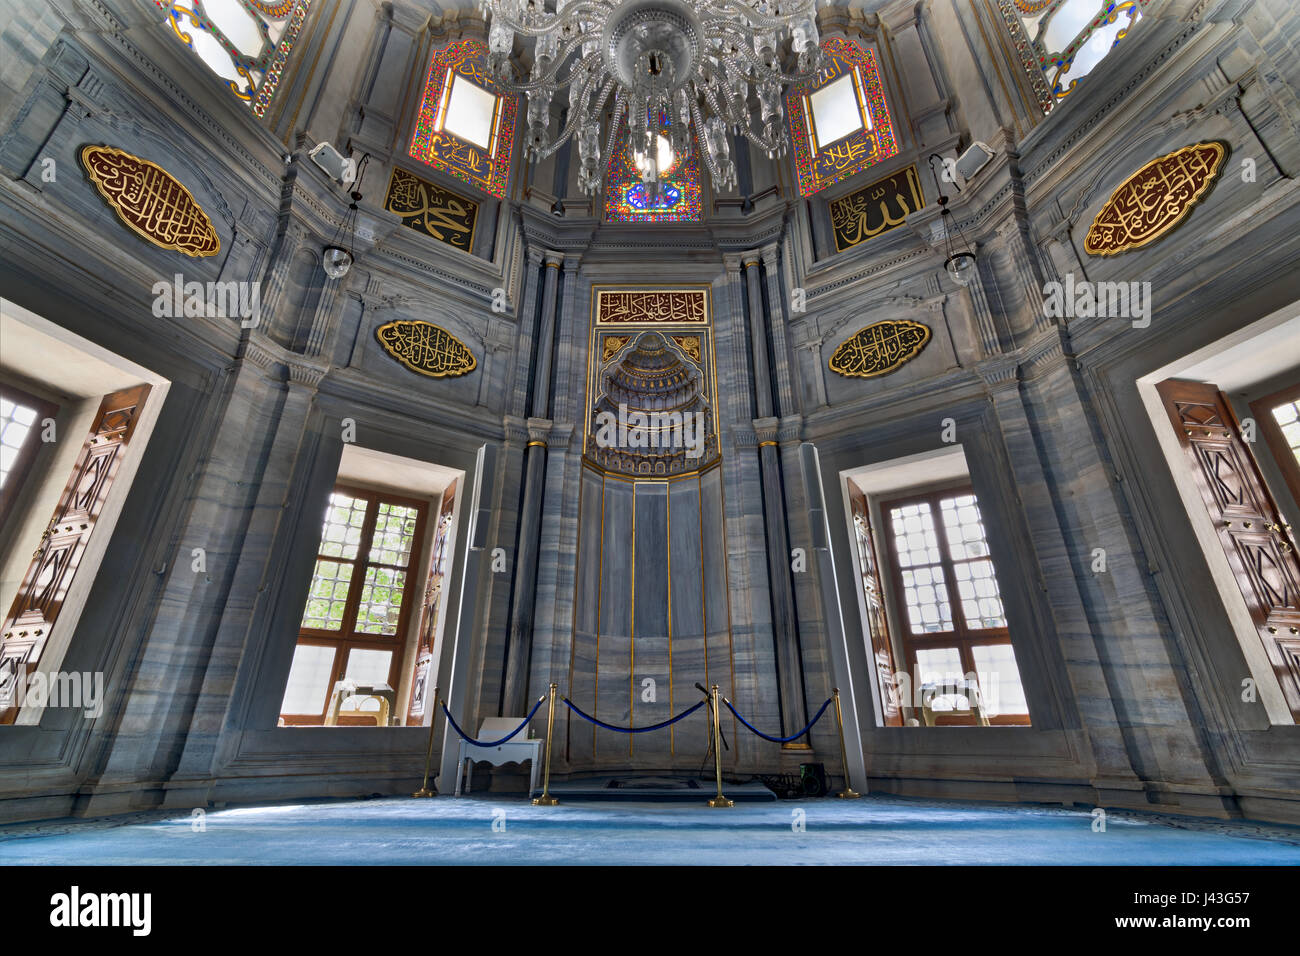 Interior of Nuruosmaniye Mosque showing the Niche (Mihrab), marble wall and stained glass windows, an Ottoman Baroque style mosque completed in 1755,  Stock Photo